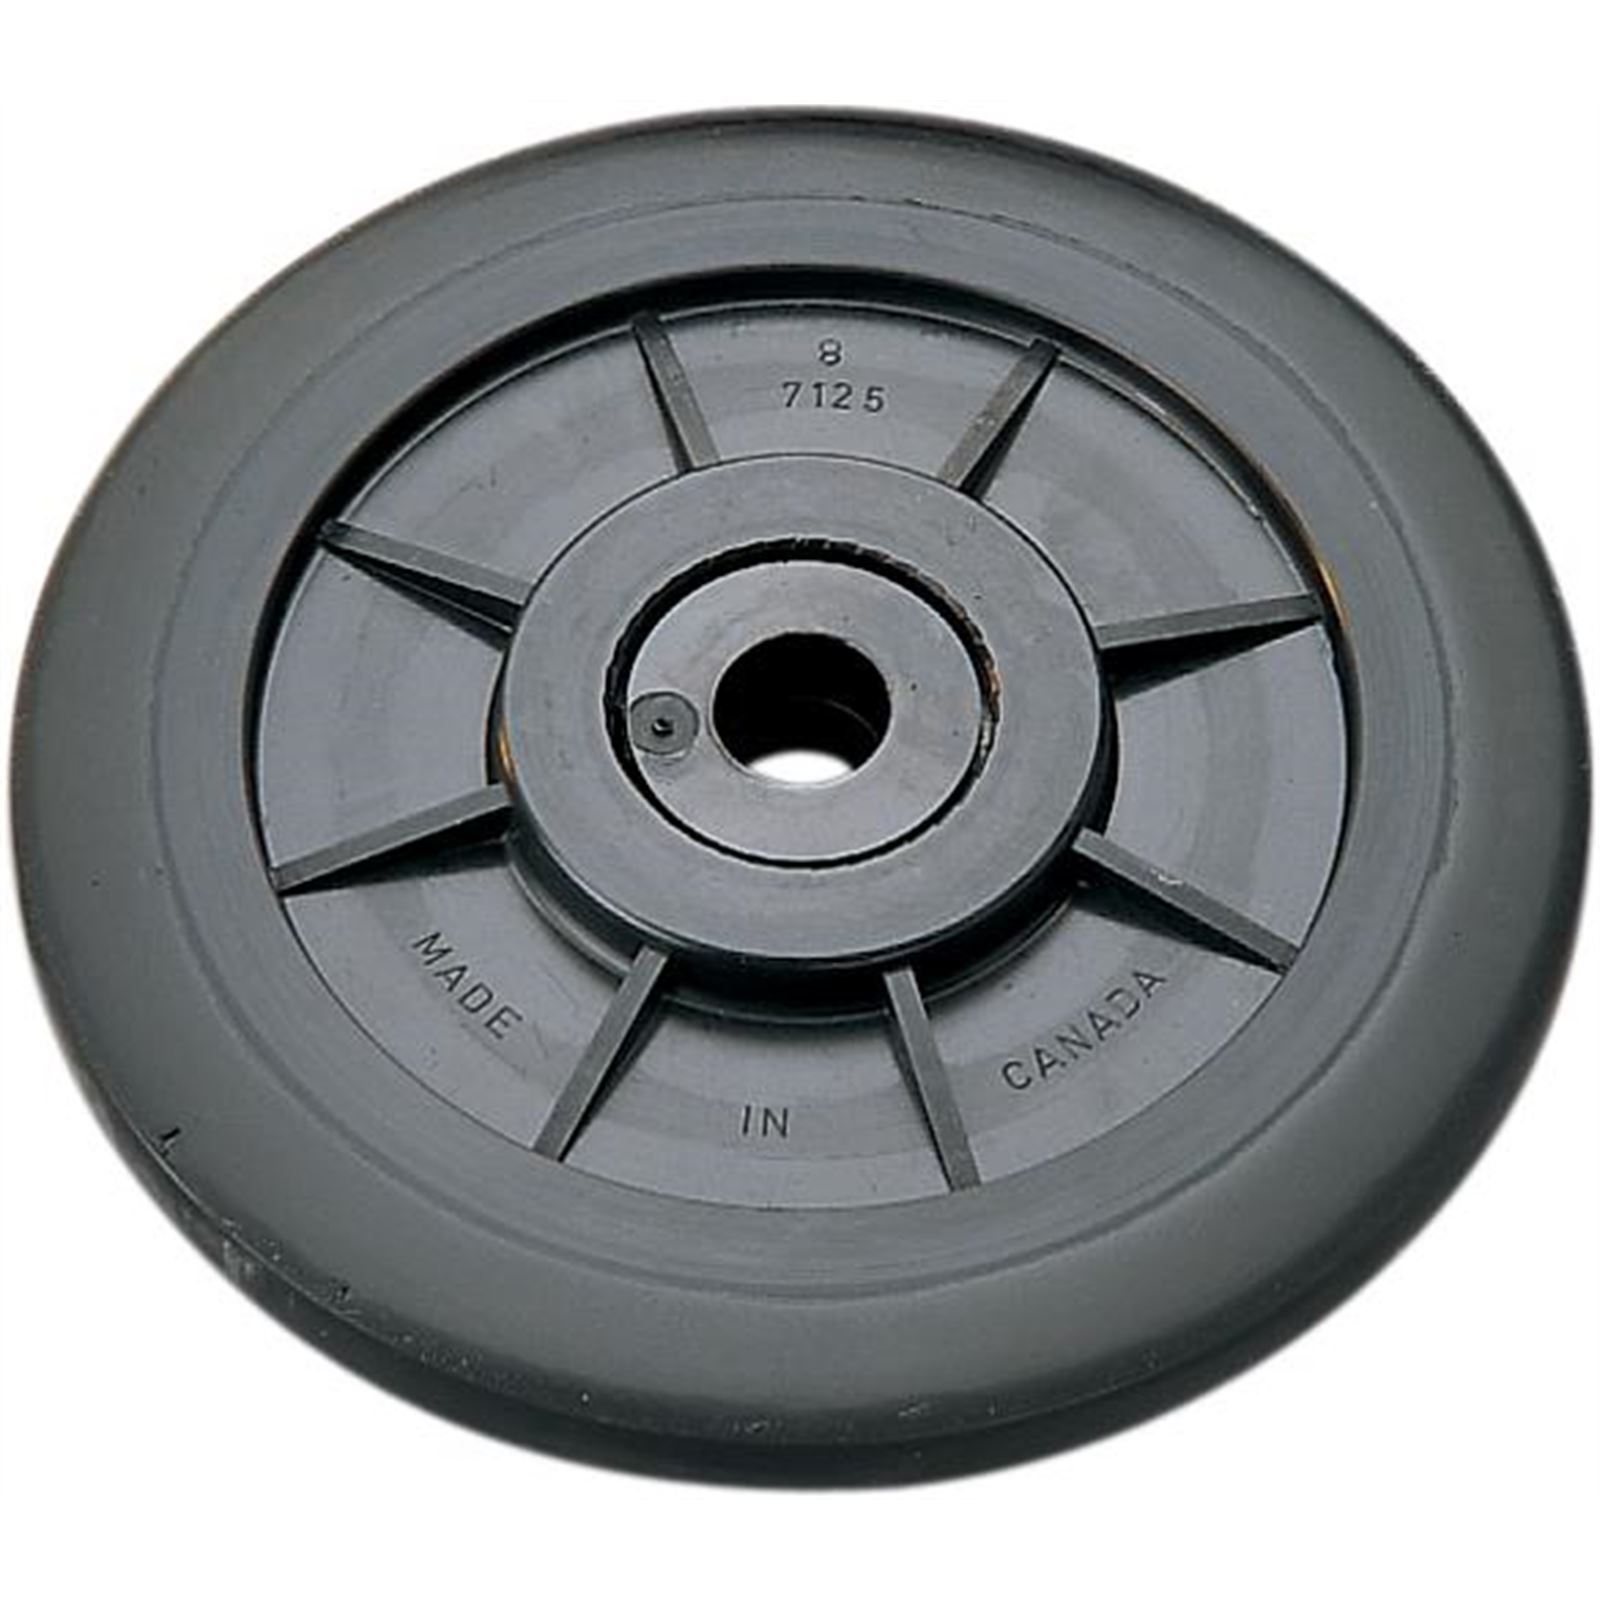 Parts Unlimited Idler Wheel with 6205-2RS Bearing/Bushing - Group 7 - 7.125" OD x 0.75" ID